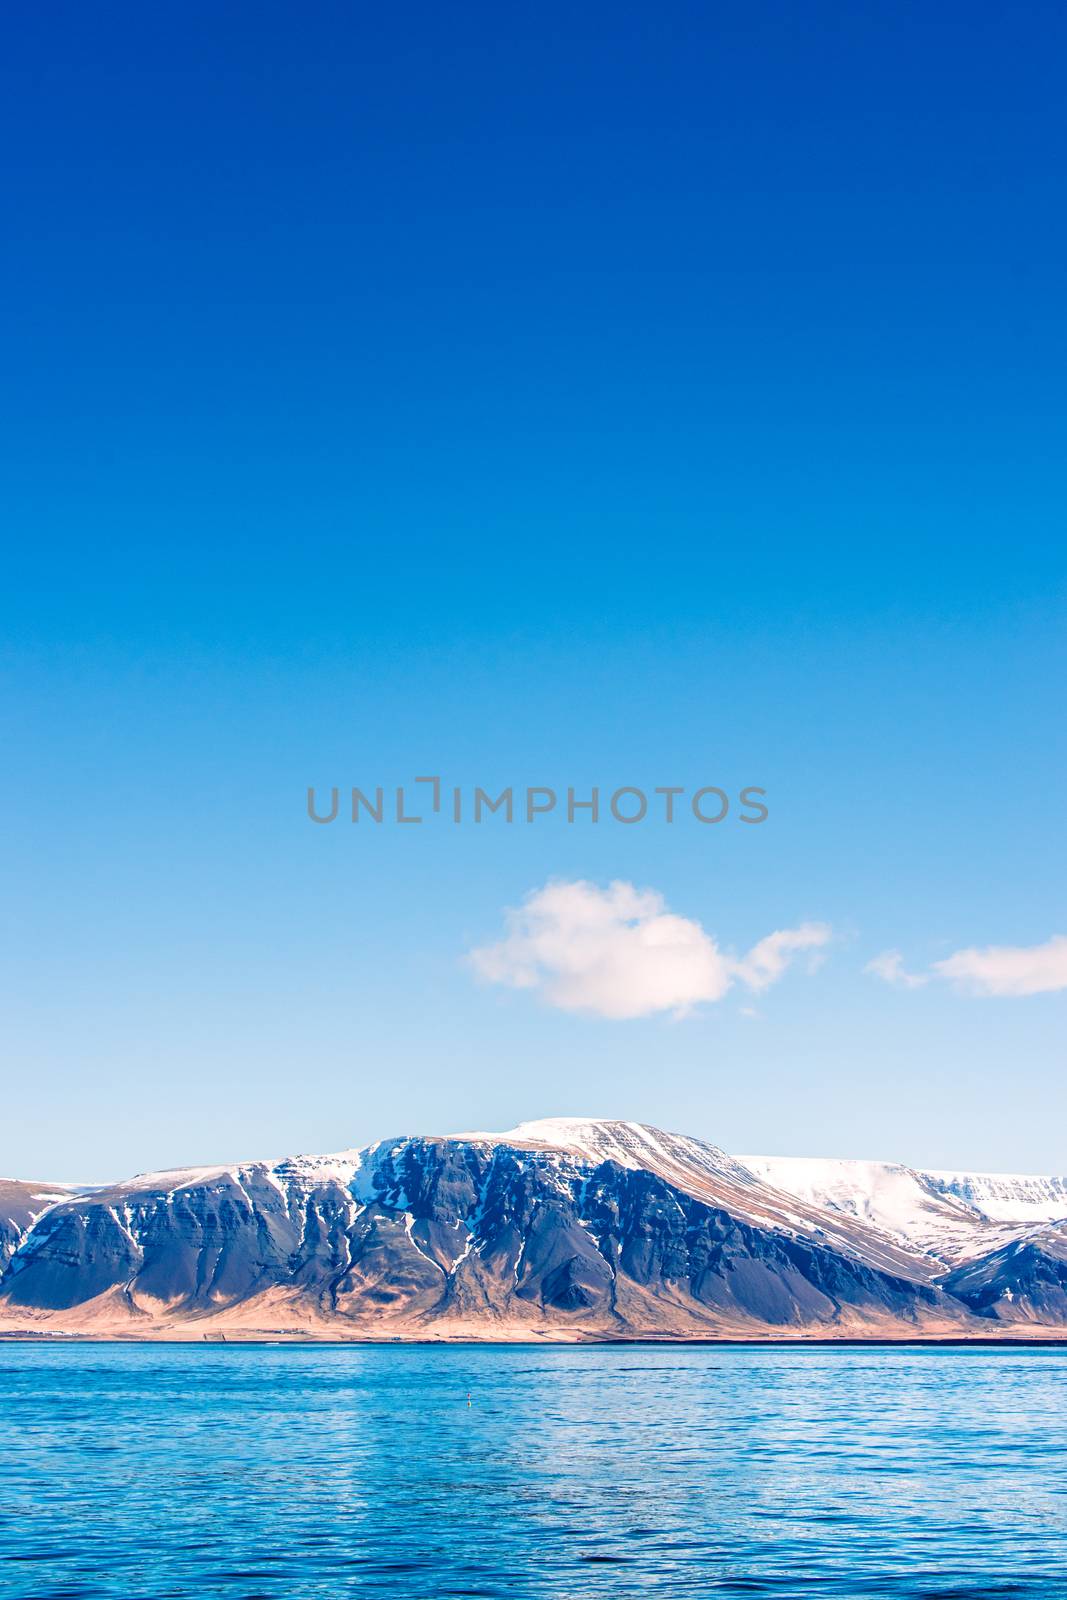 Idyllic mountain scenery by the ocean with white clouds